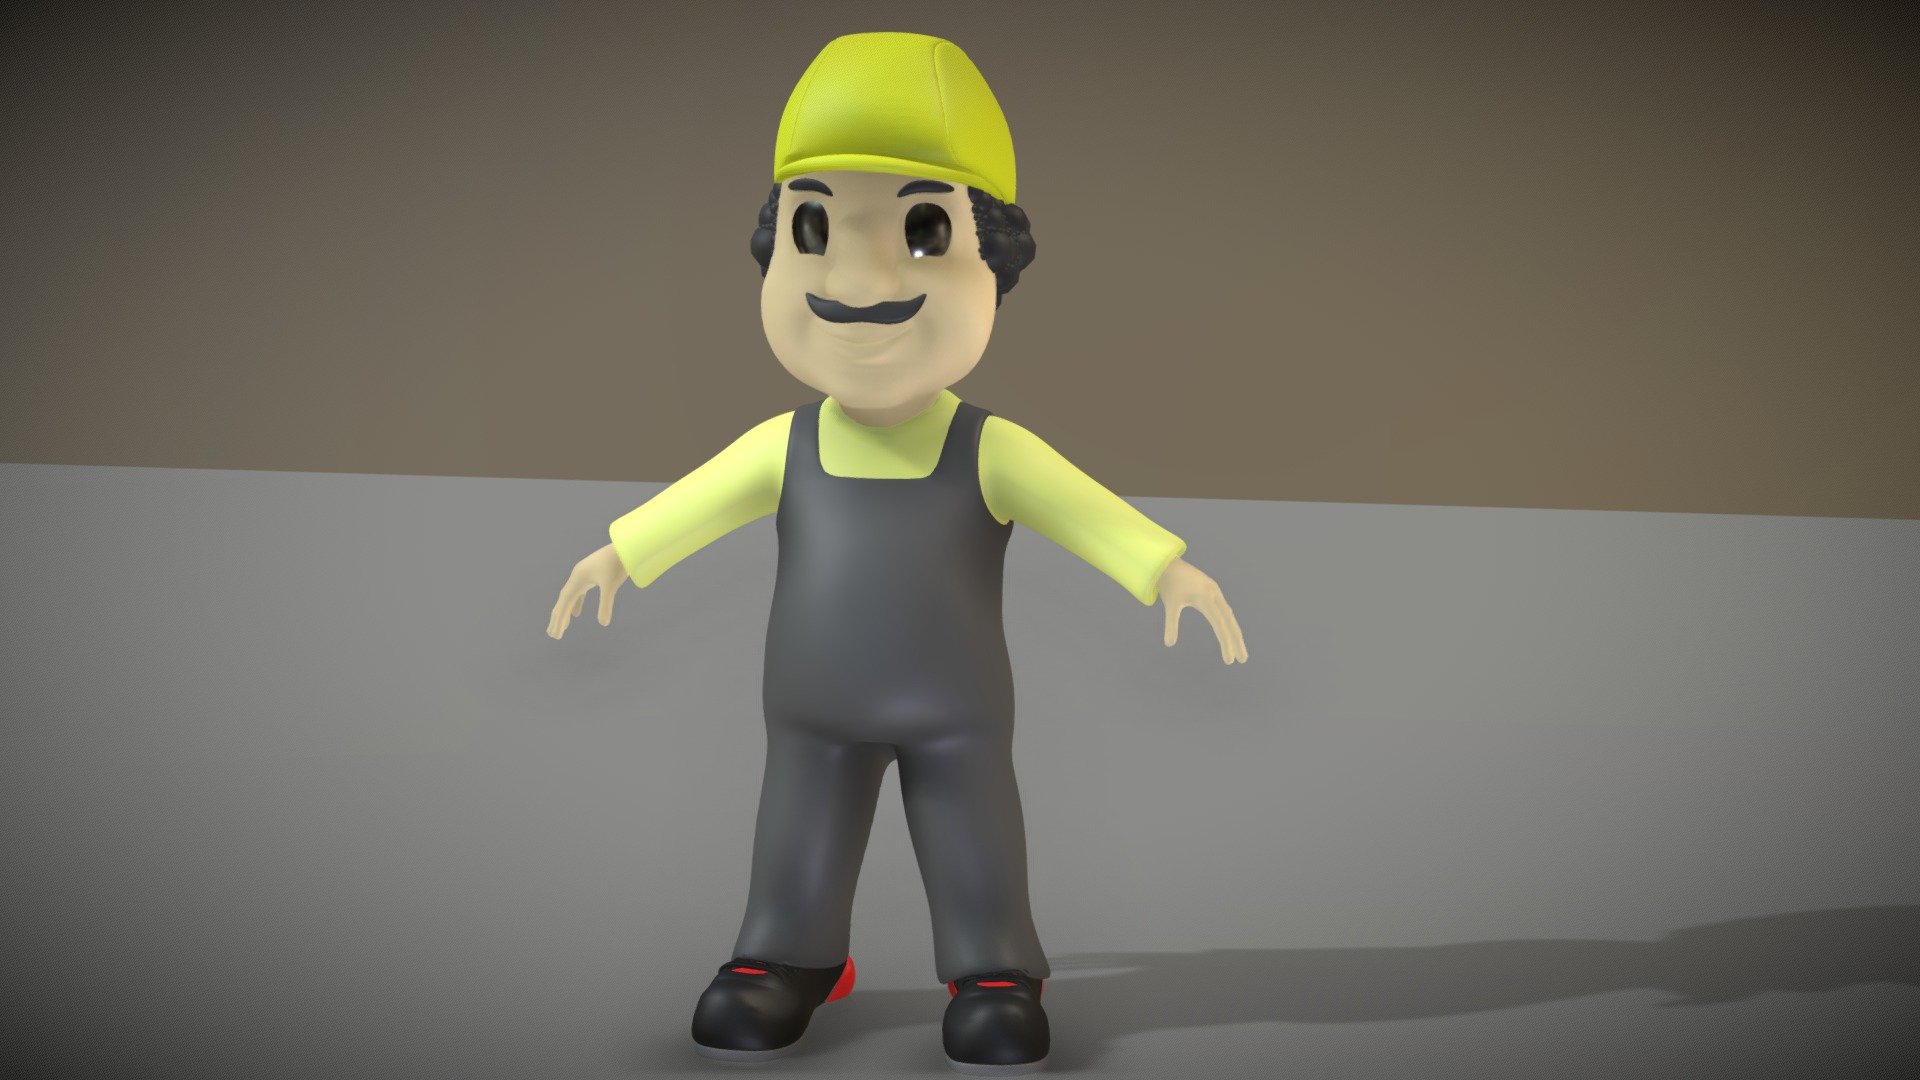 Cartoon Worker

Downlod Low Mesh for Fast Redndering 
Quality Output Render in Less time - 3D Cartoon Worker - 3D model by Kailash H Kanojia (@KailashHKanojia) 3d model